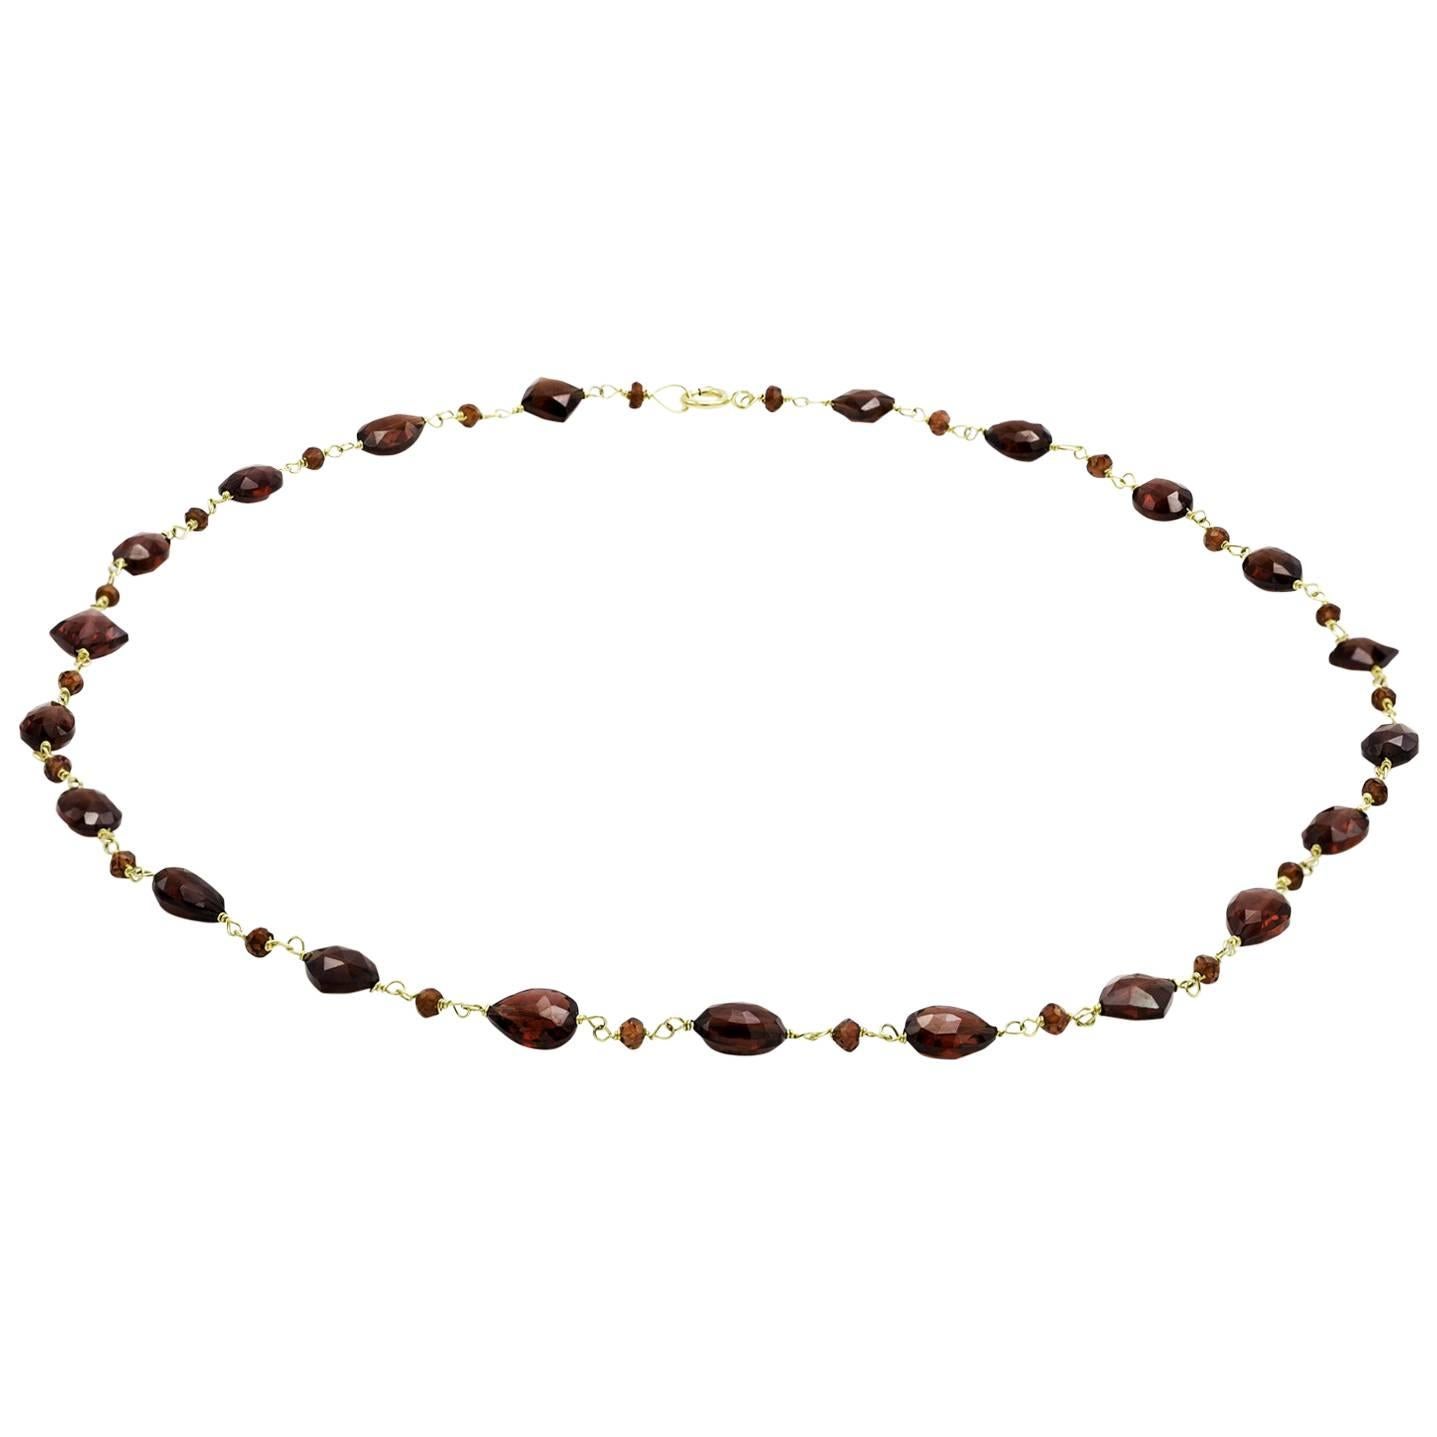 Faceted Garnet Bead Necklace in Gold with Tear Shapes, Squares, and Ovals 